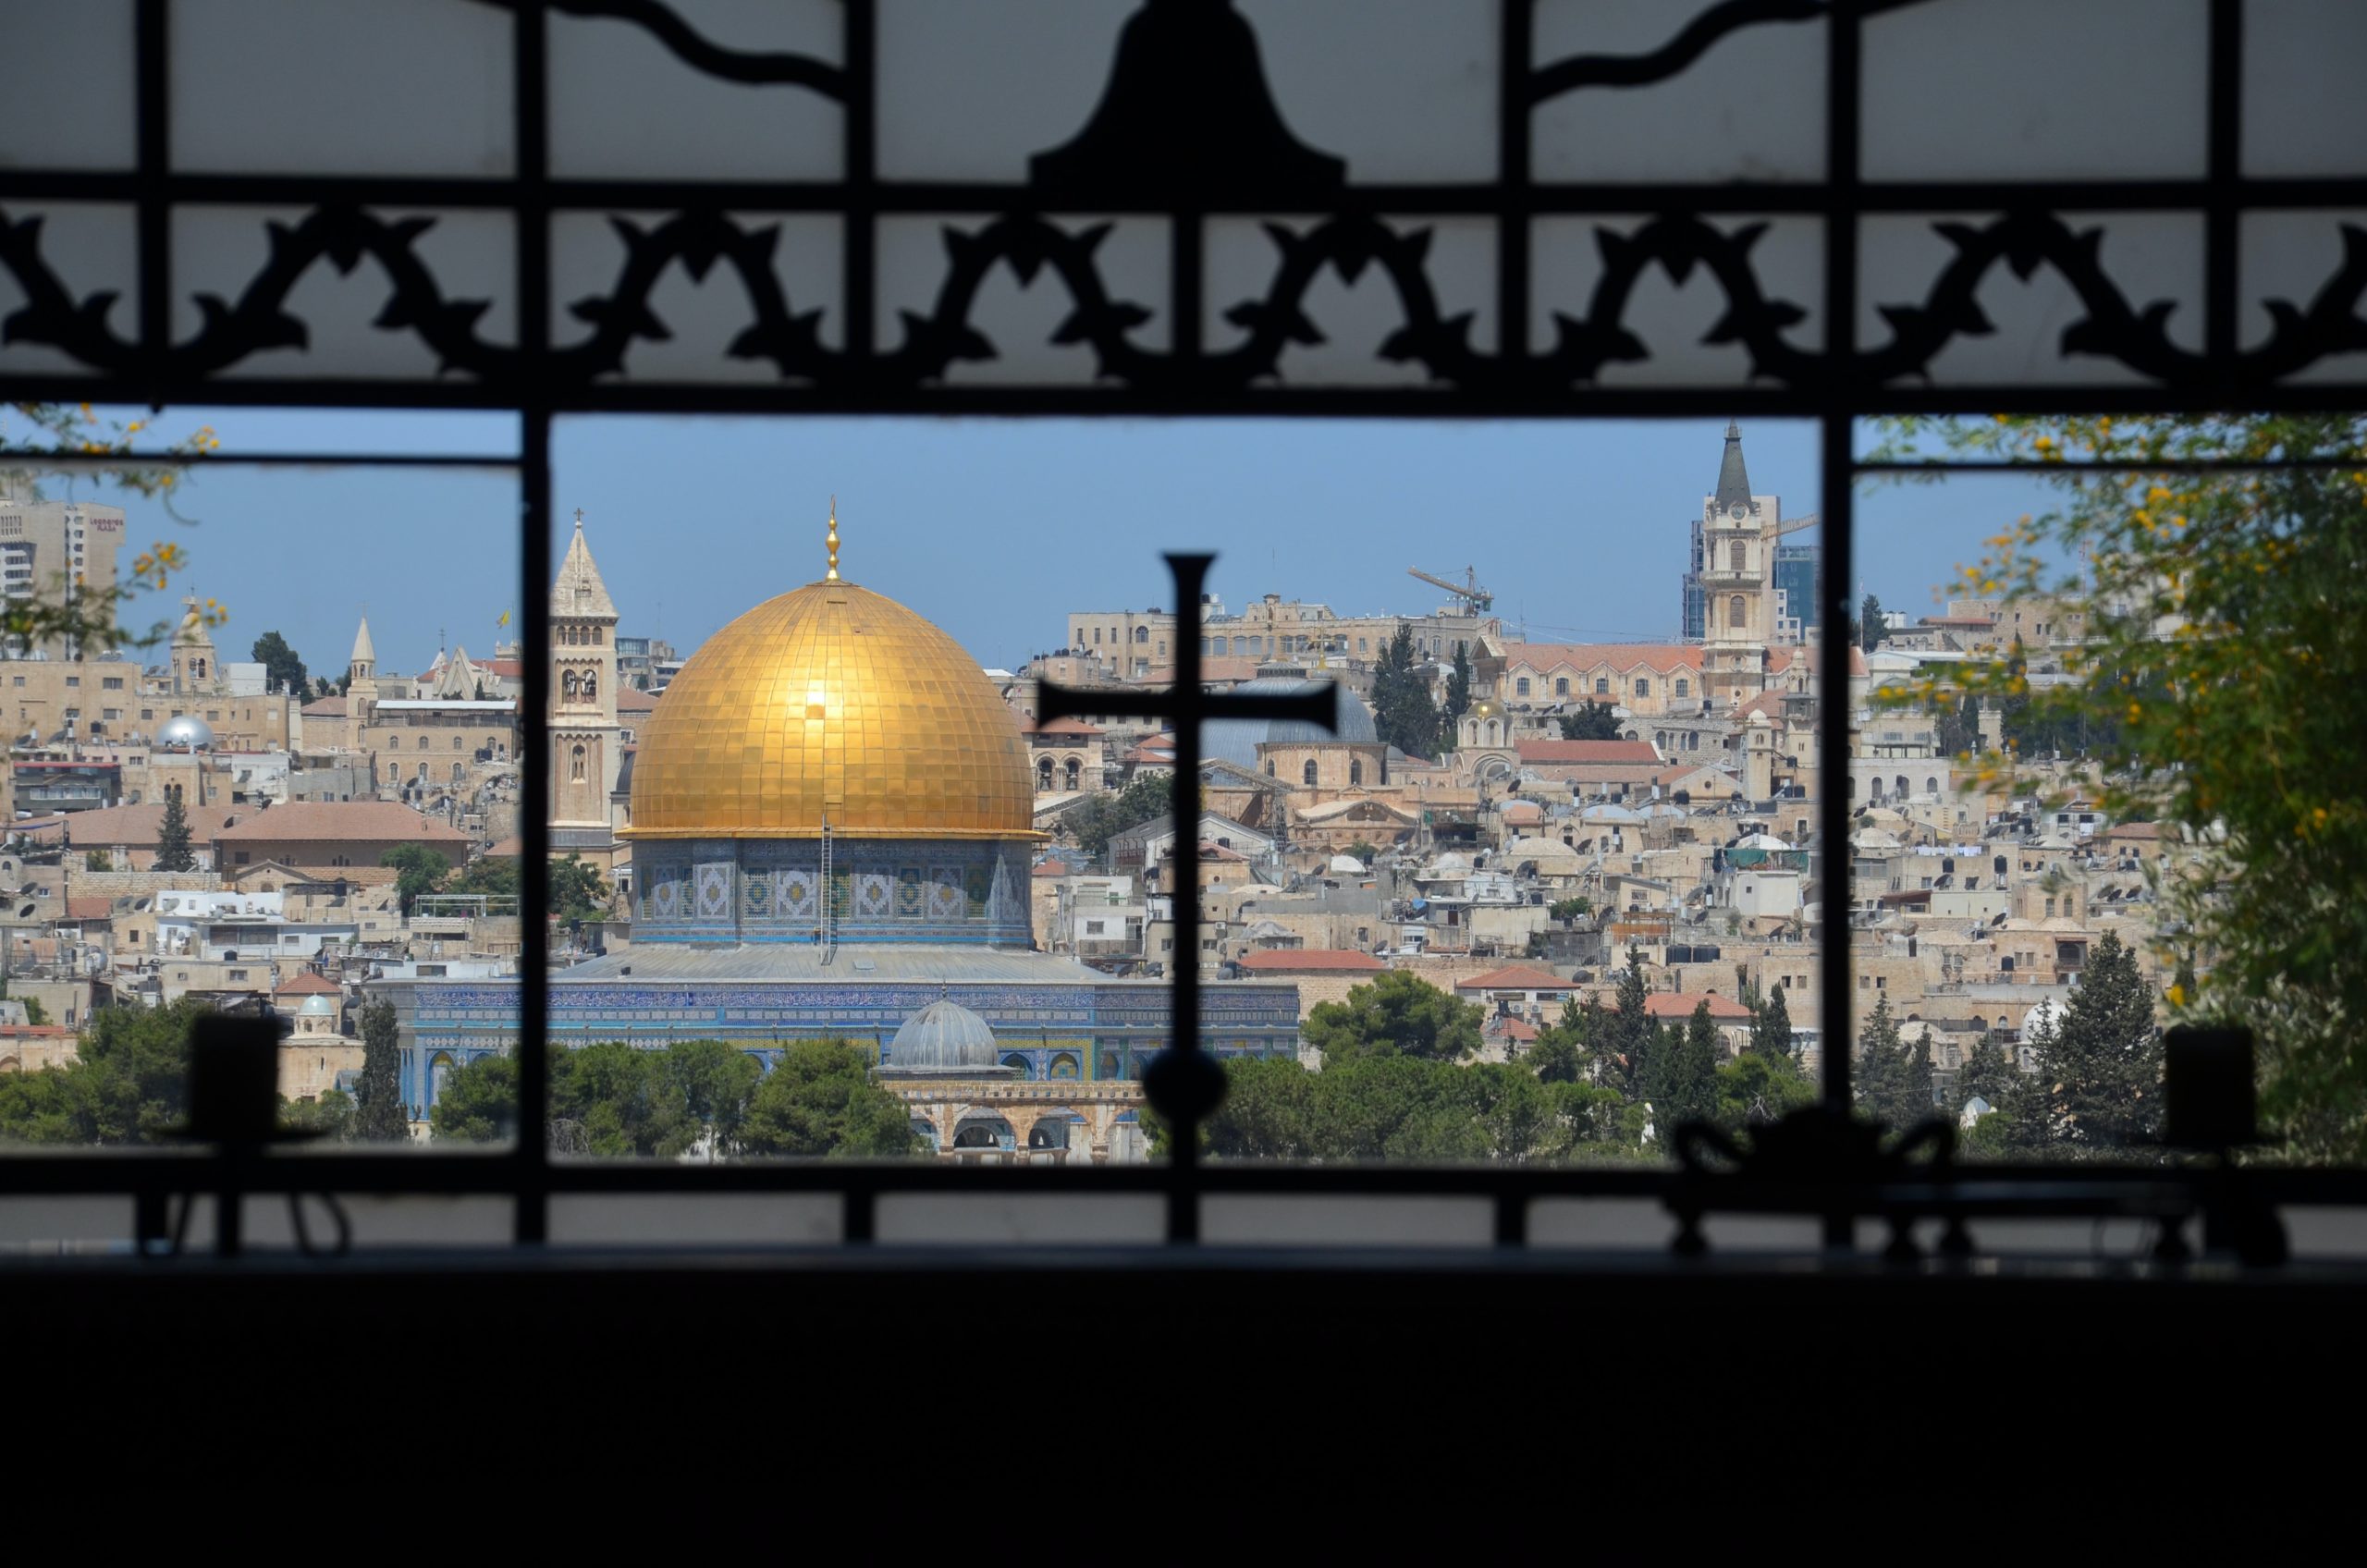 An image of a cross with a mosque in the background taken on the Dome of the Rock in Jerusalem